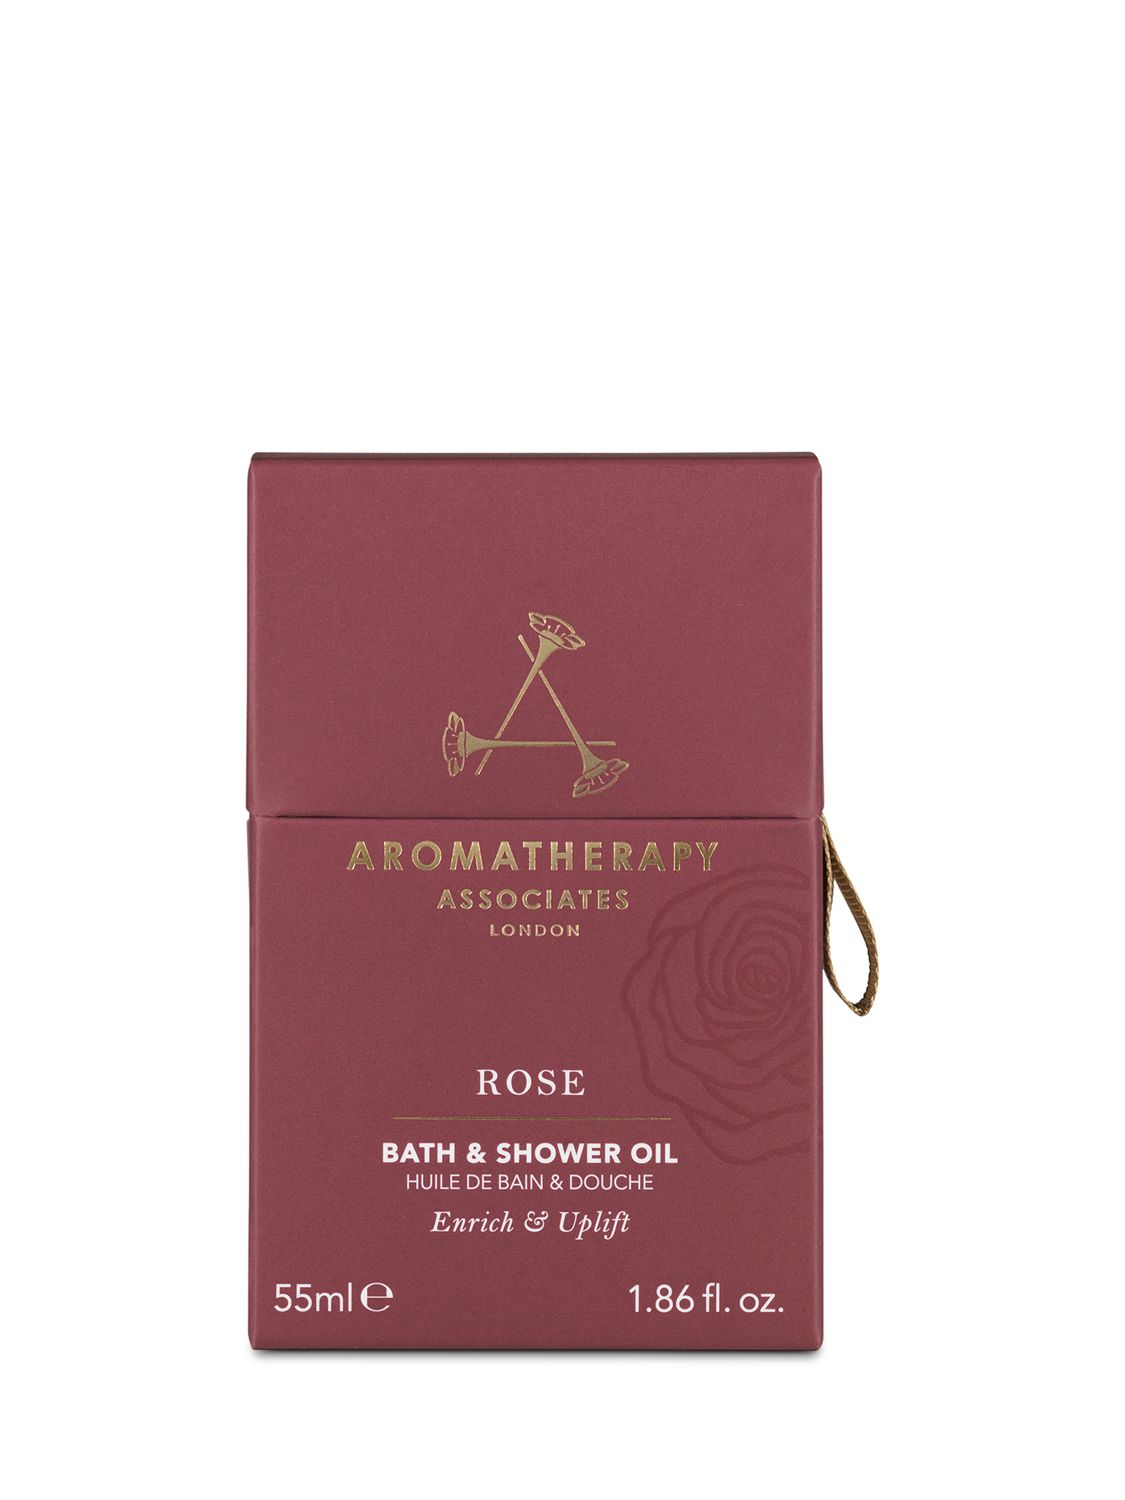 Aromatherapy Associates Rose Bath and Shower Oil, 55ml 3